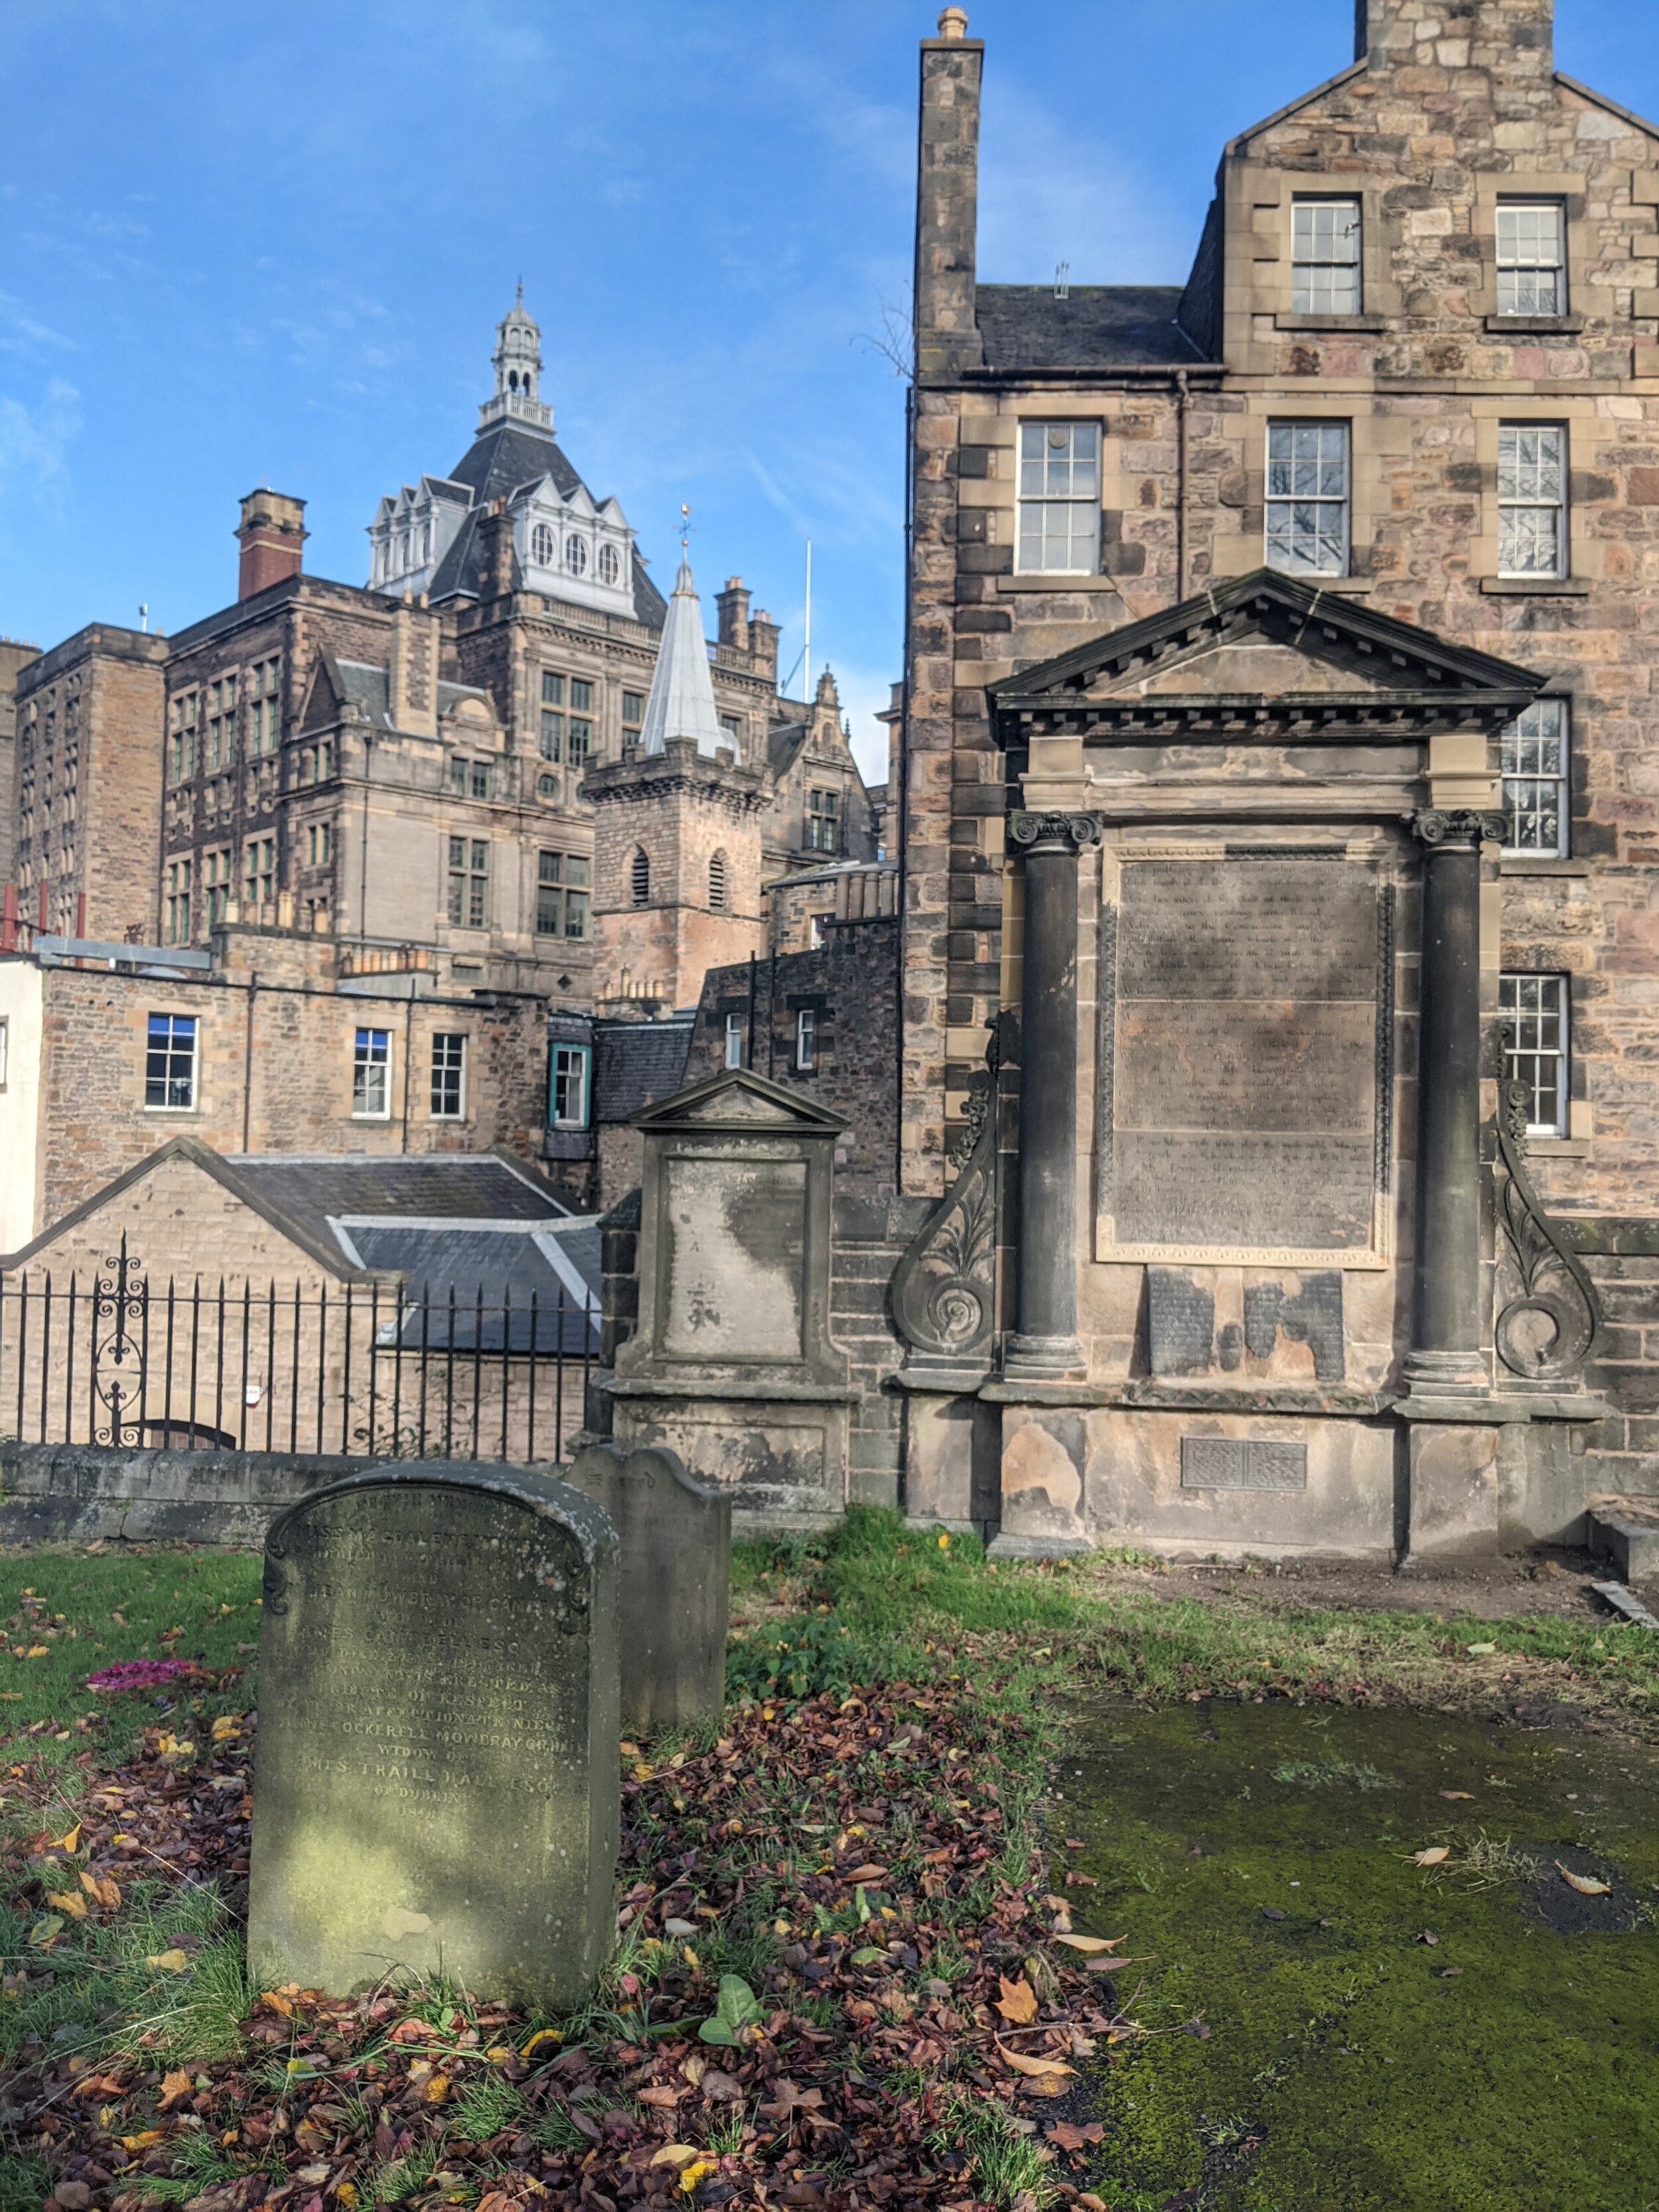 These are all from Greyfriars Kirk Cemetary